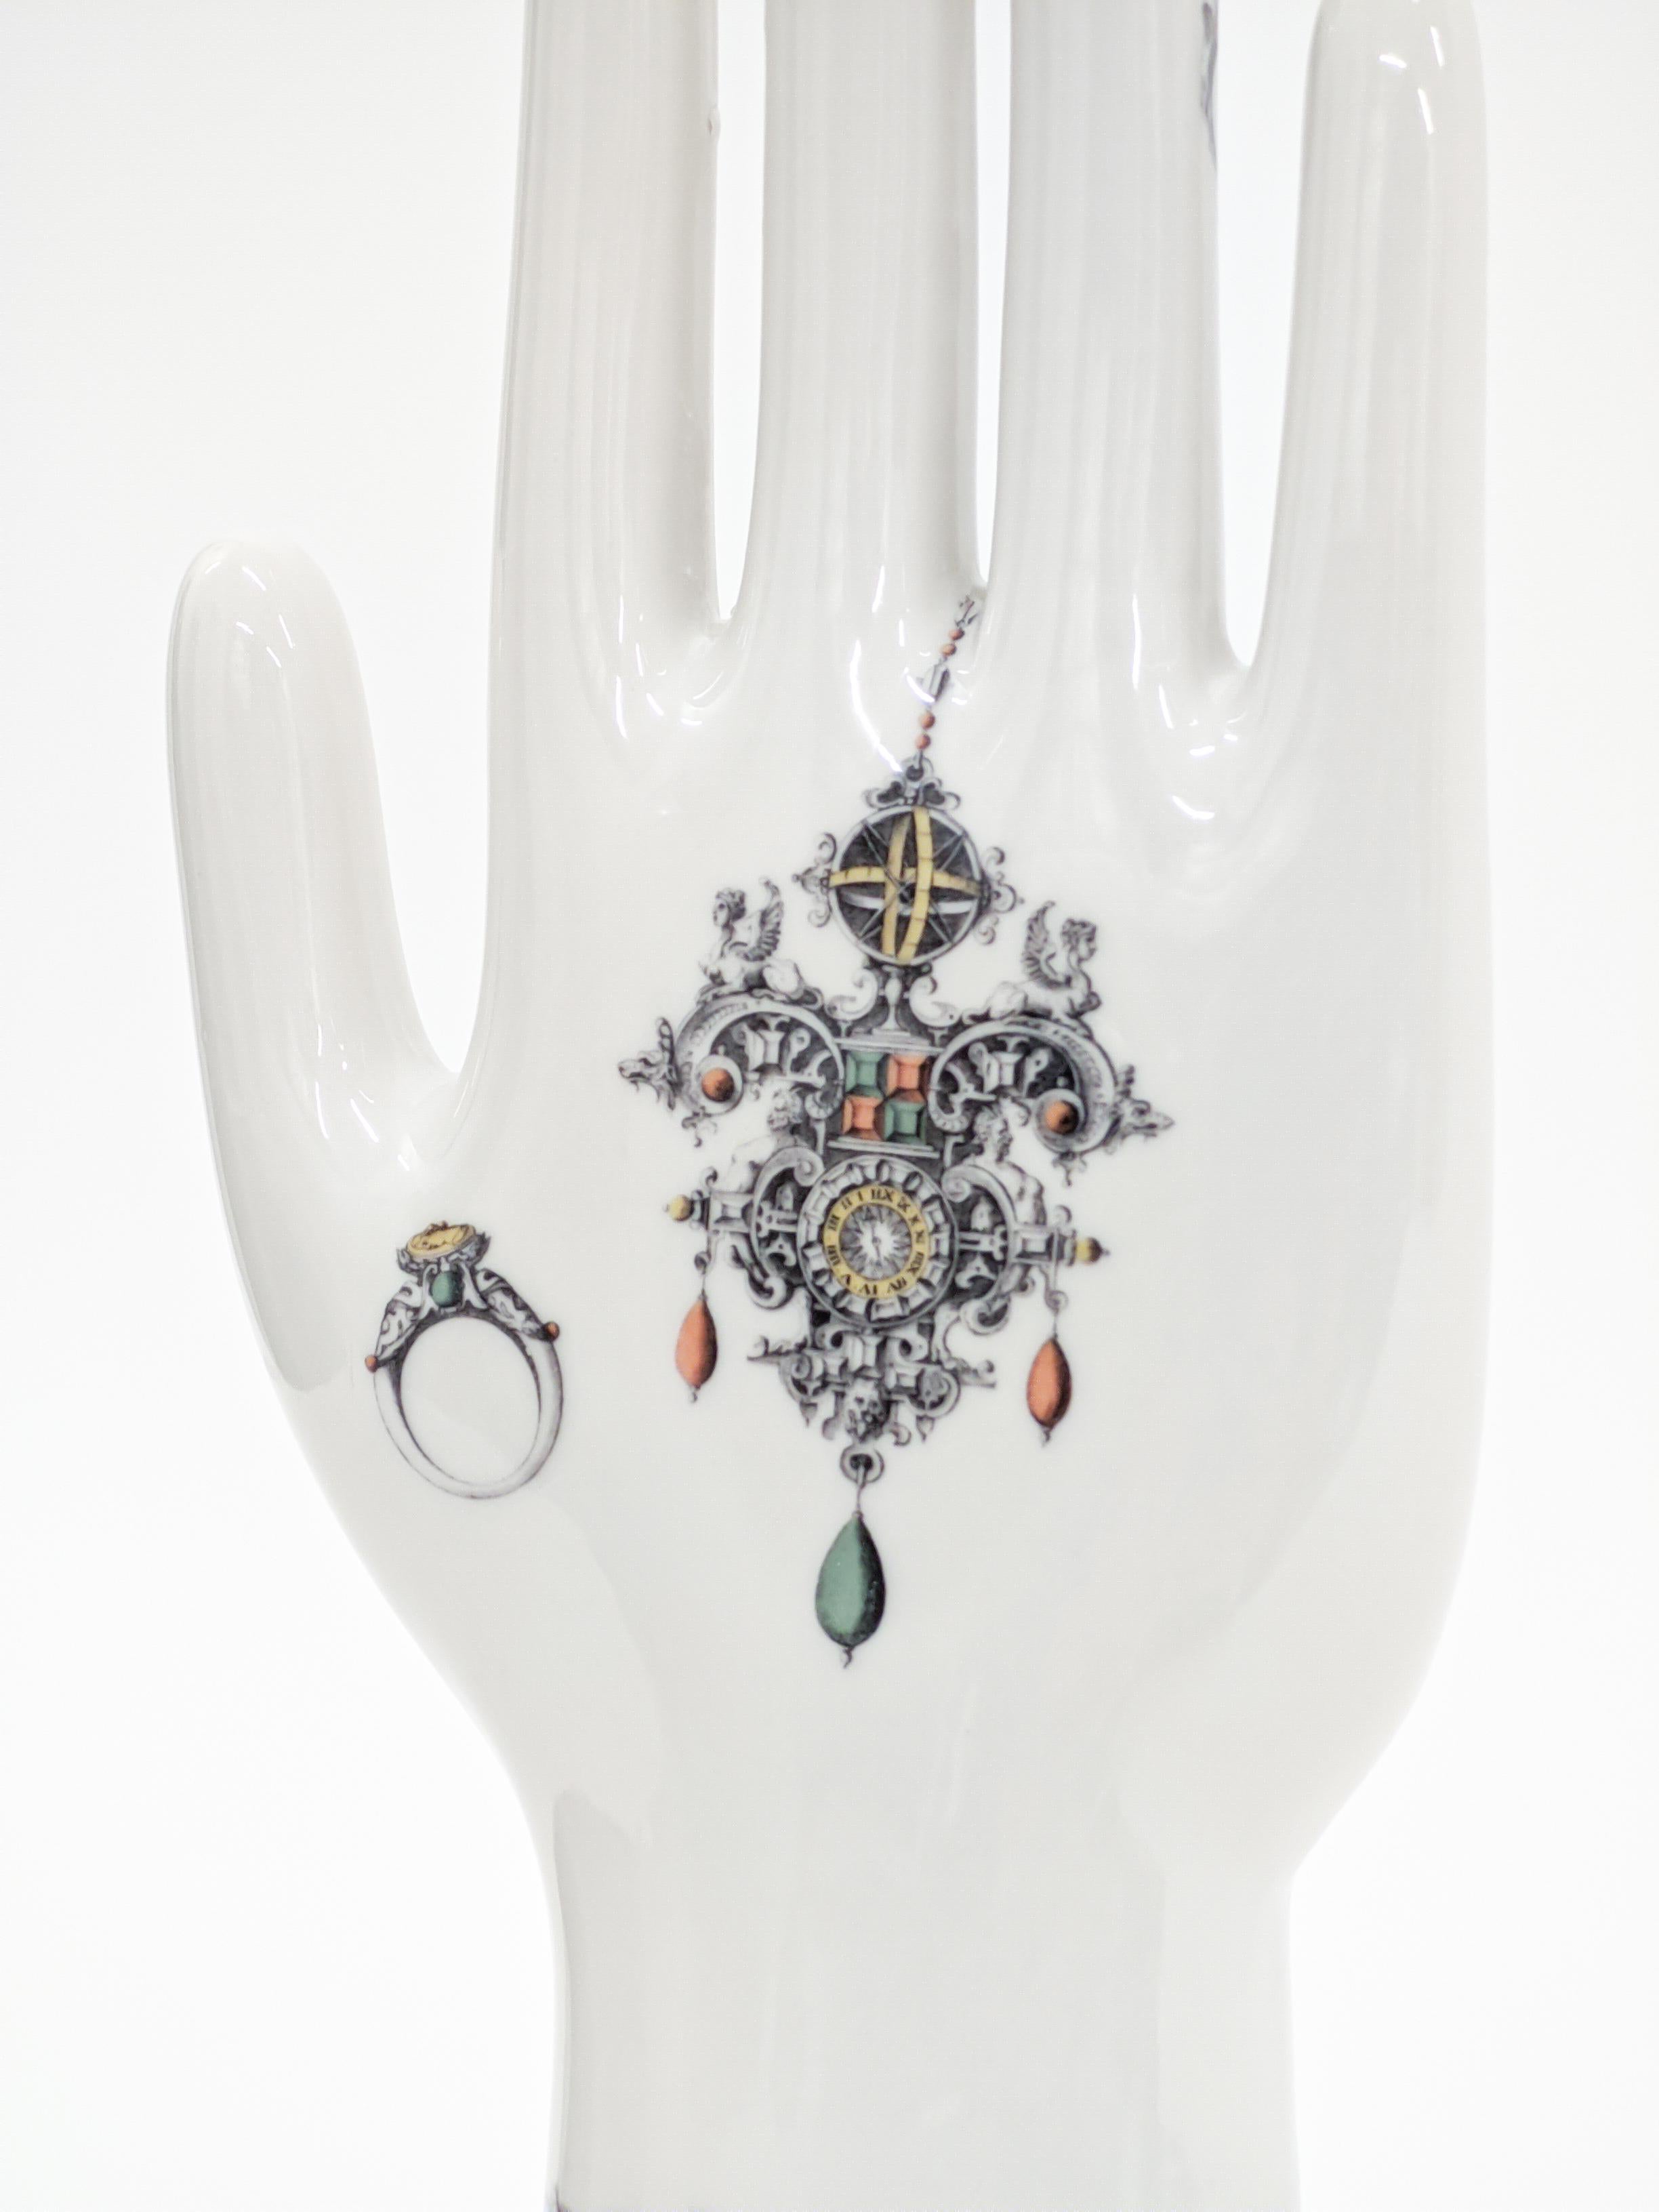 Contemporary Anatomica, Porcelain Hand with Jewels Decoration by Vito Nesta For Sale